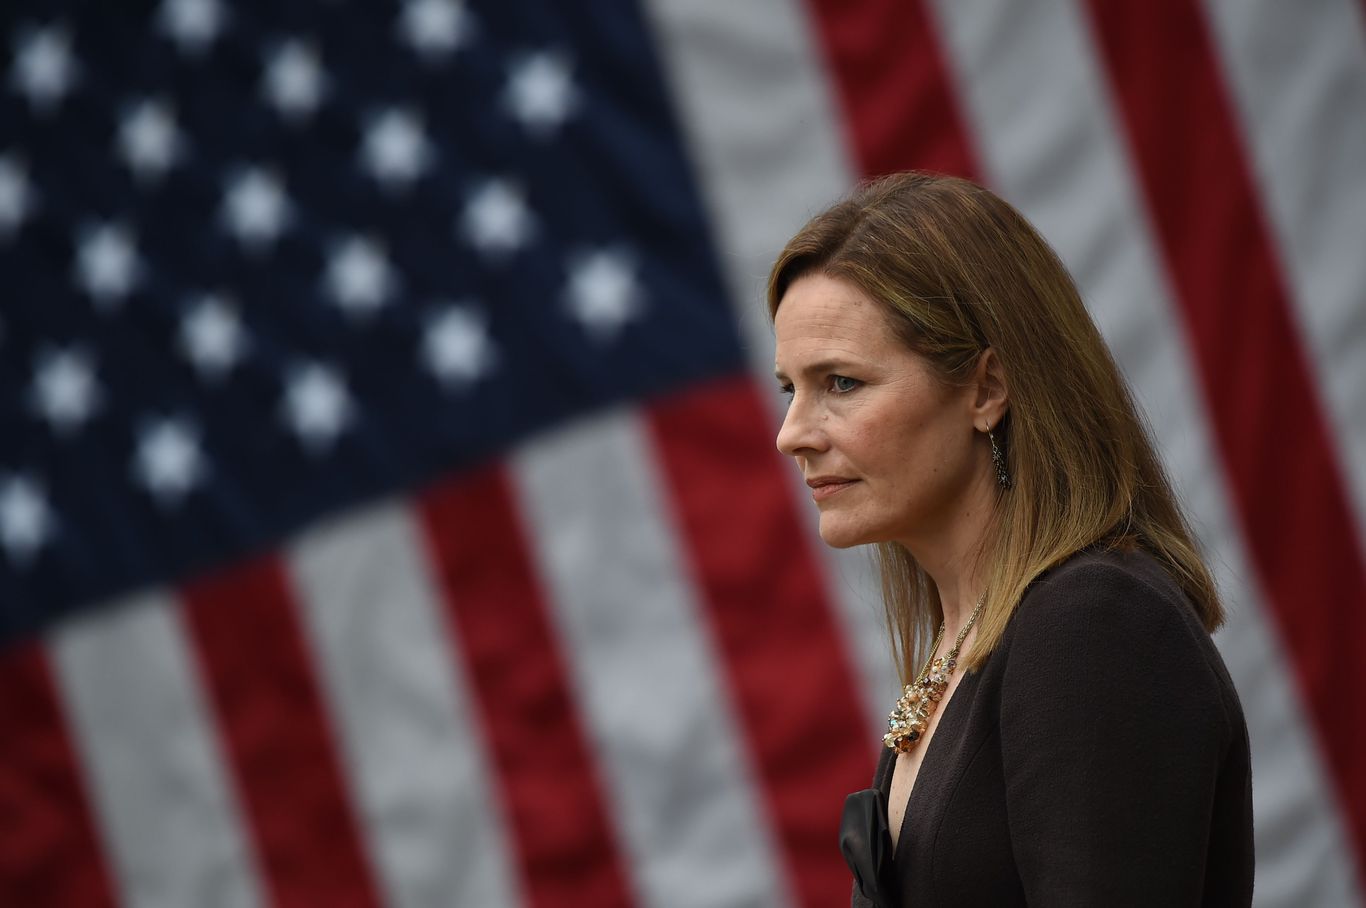 What they’re asserting: Trump nominates Amy Coney Barrett for Supreme Court